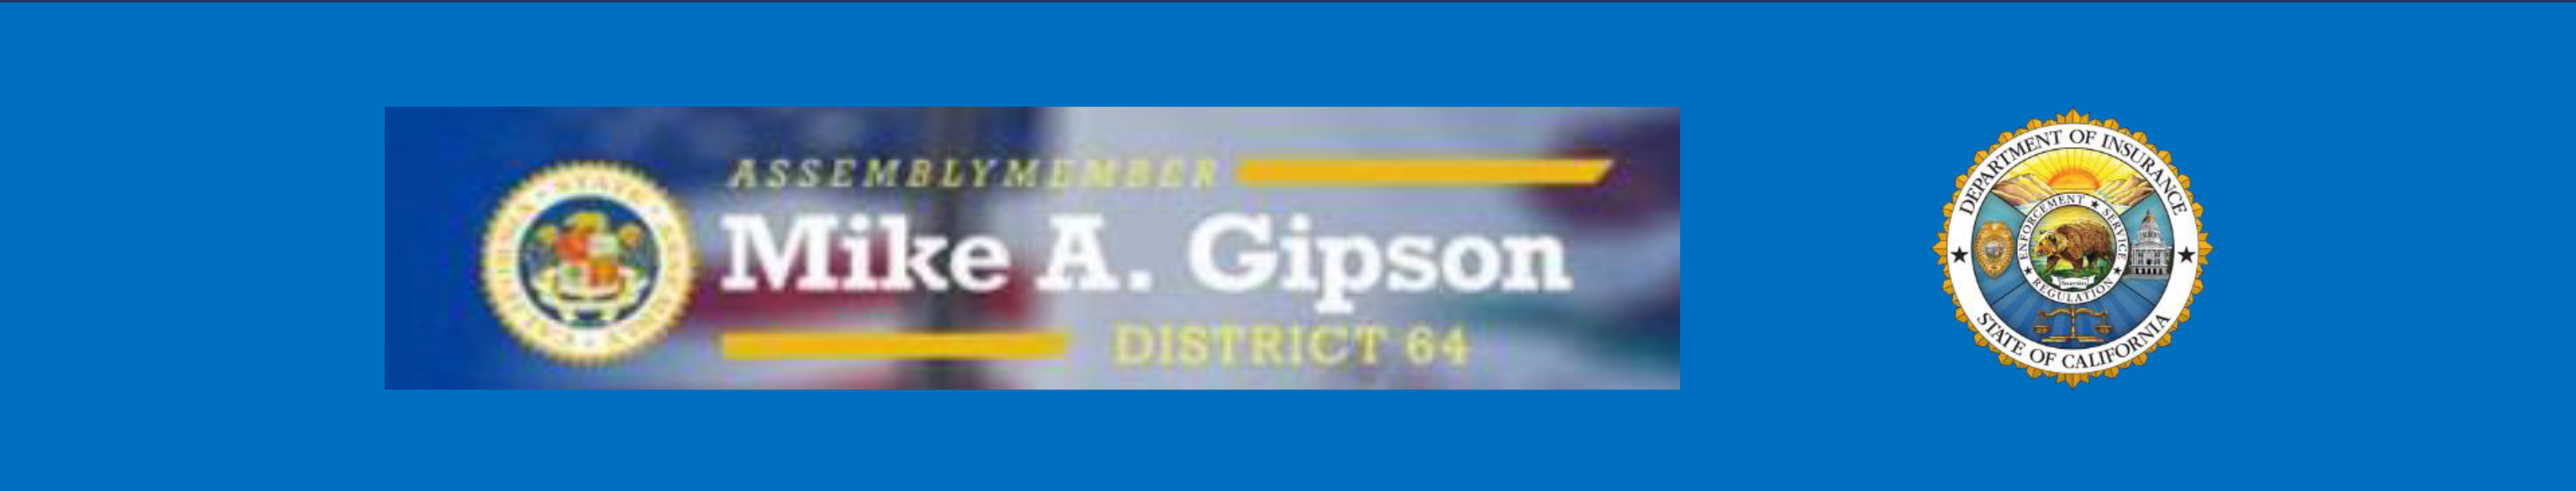 Assembly District AD 64 Logo, California Department of Insurance Logo